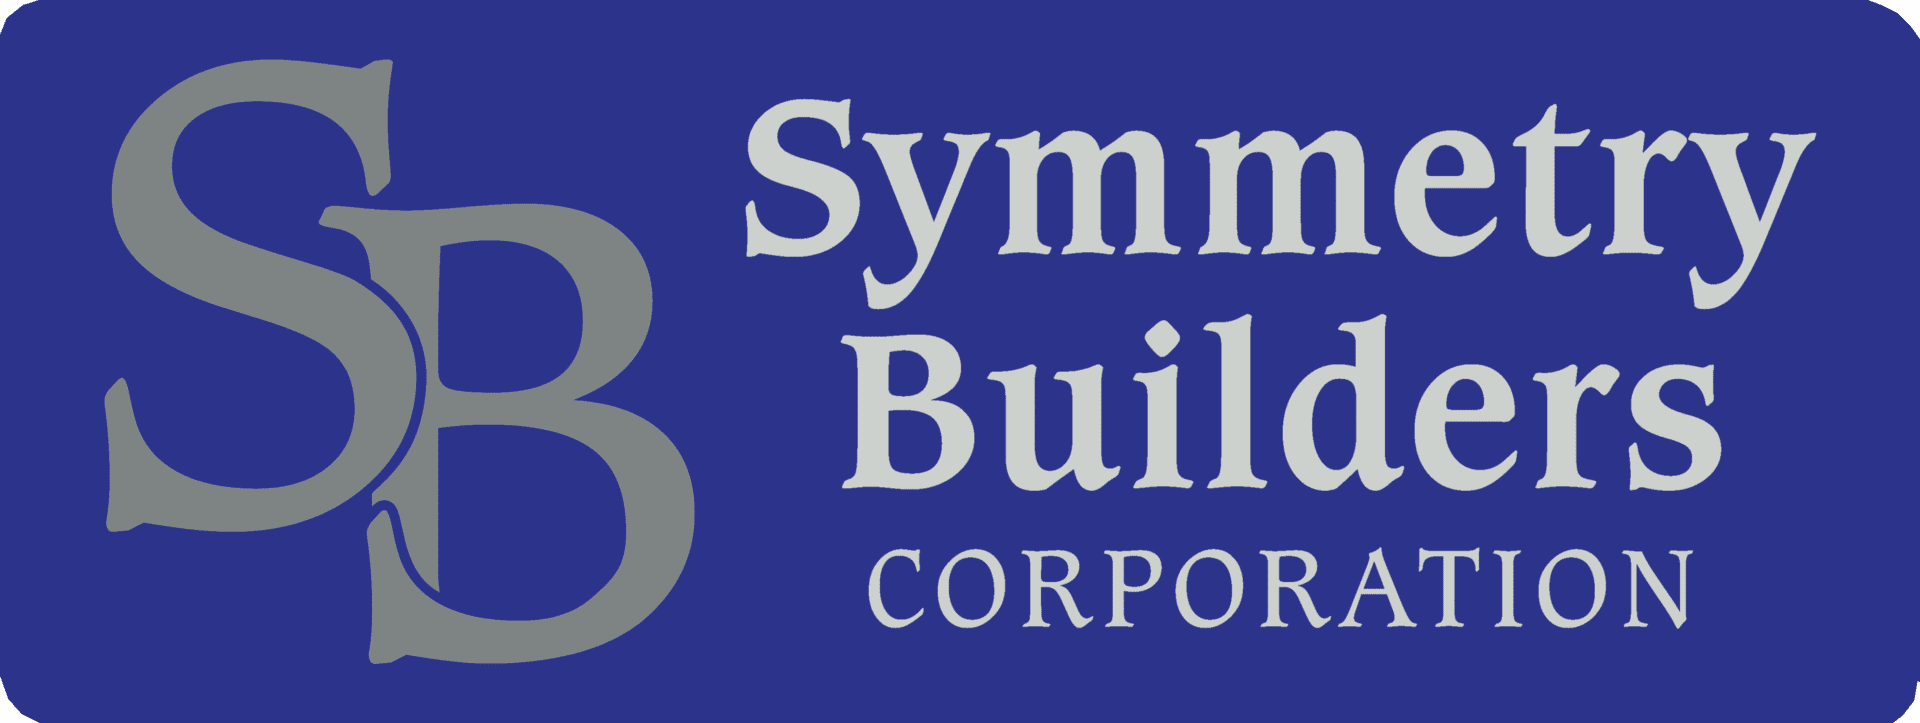 A blue and white logo for the symmetrical building corporation.